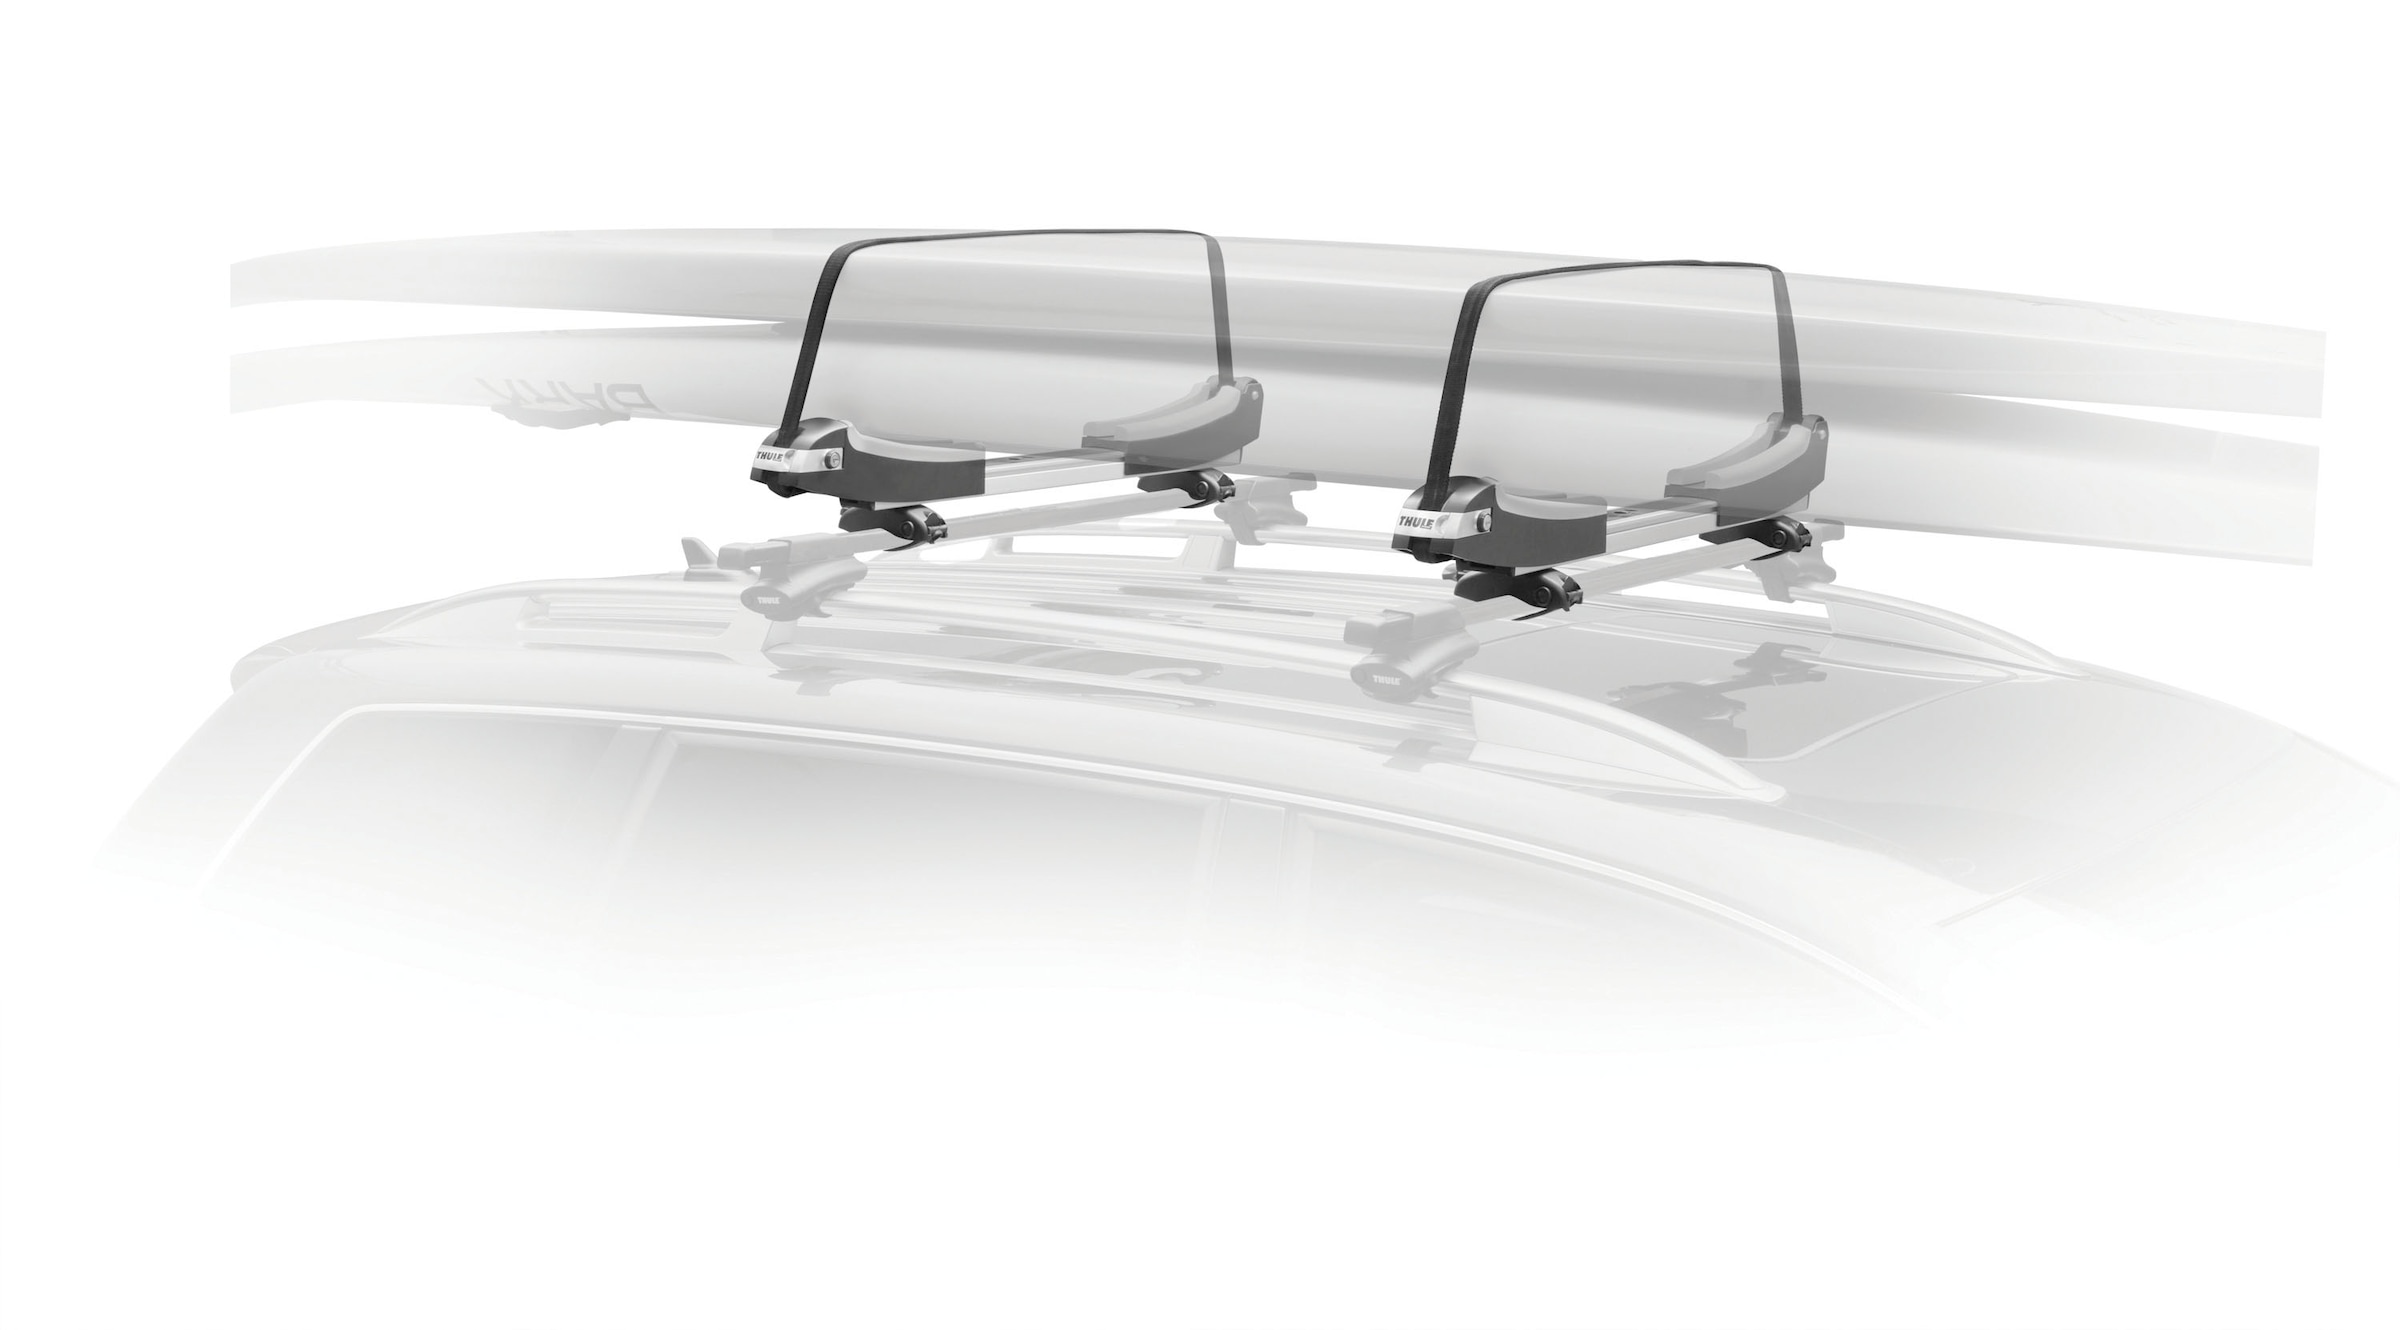 Thule Dachträger »SUP Taxi XT«, für SUP-Boards